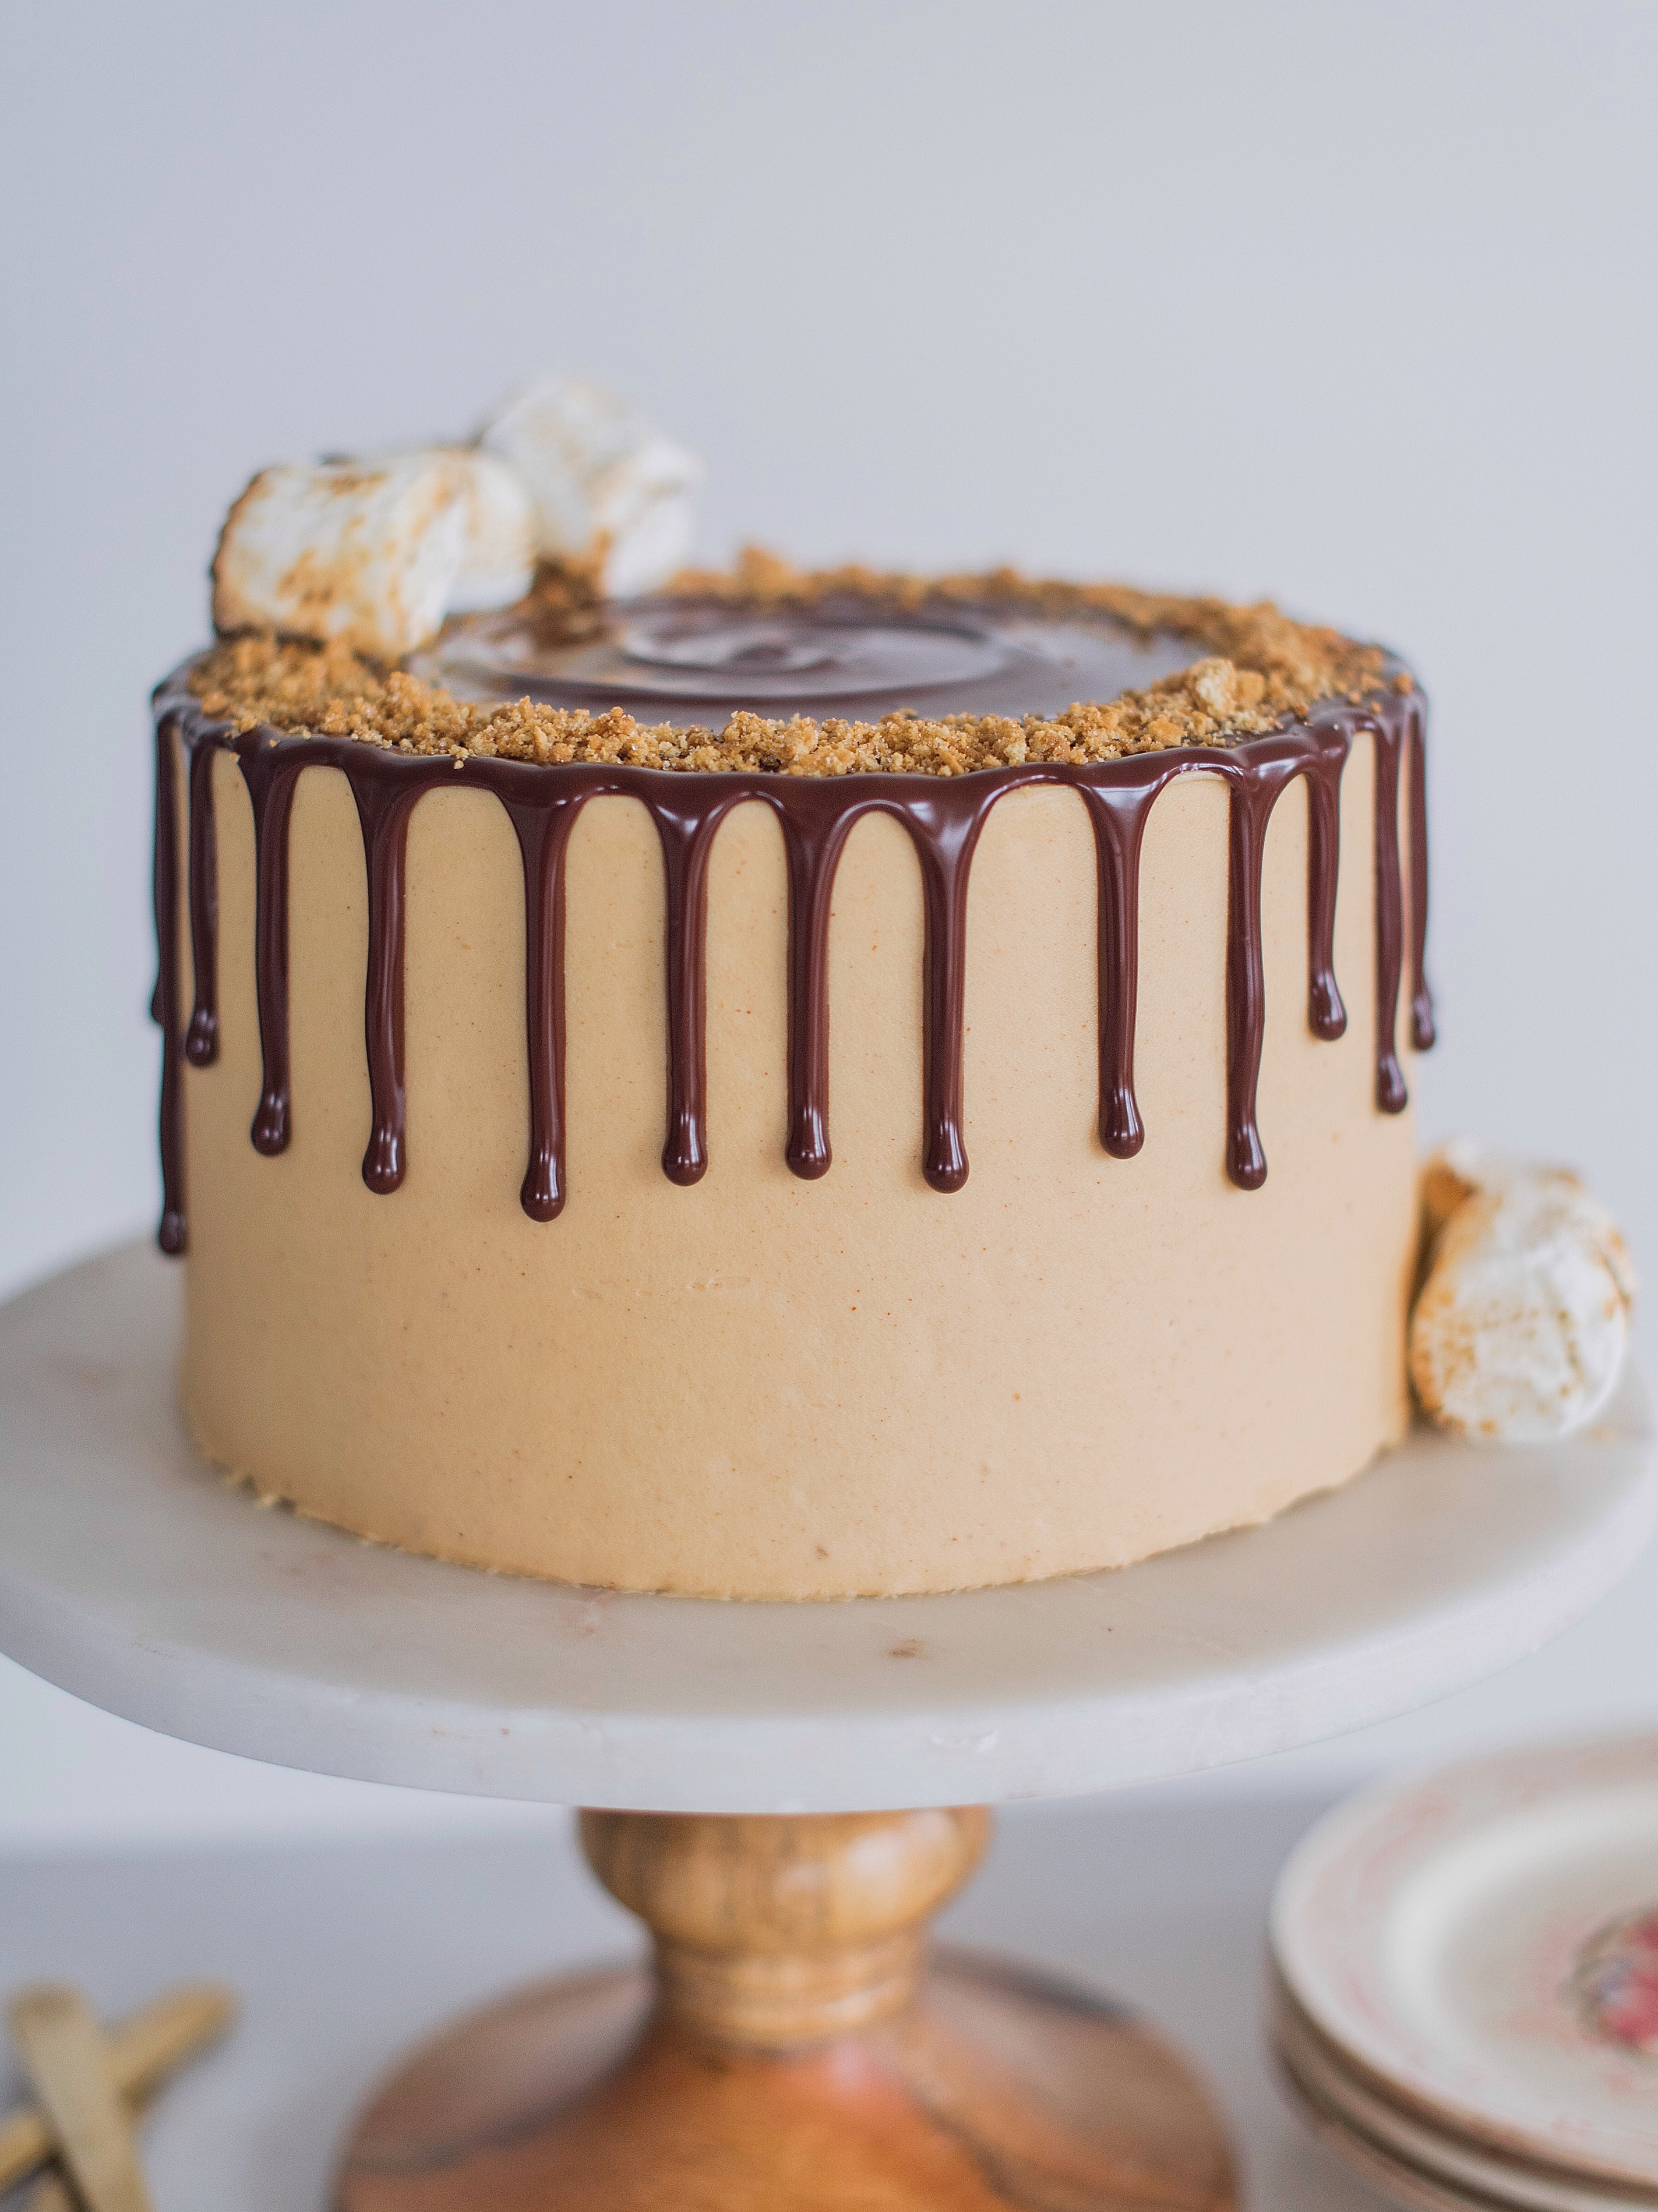 The ultimate s'mores cake for peanut butter lovers! Graham cracker cake layers with a toasted marshmallow filling, toasted graham crackers, chocolate ganache and peanut butter buttercream. 